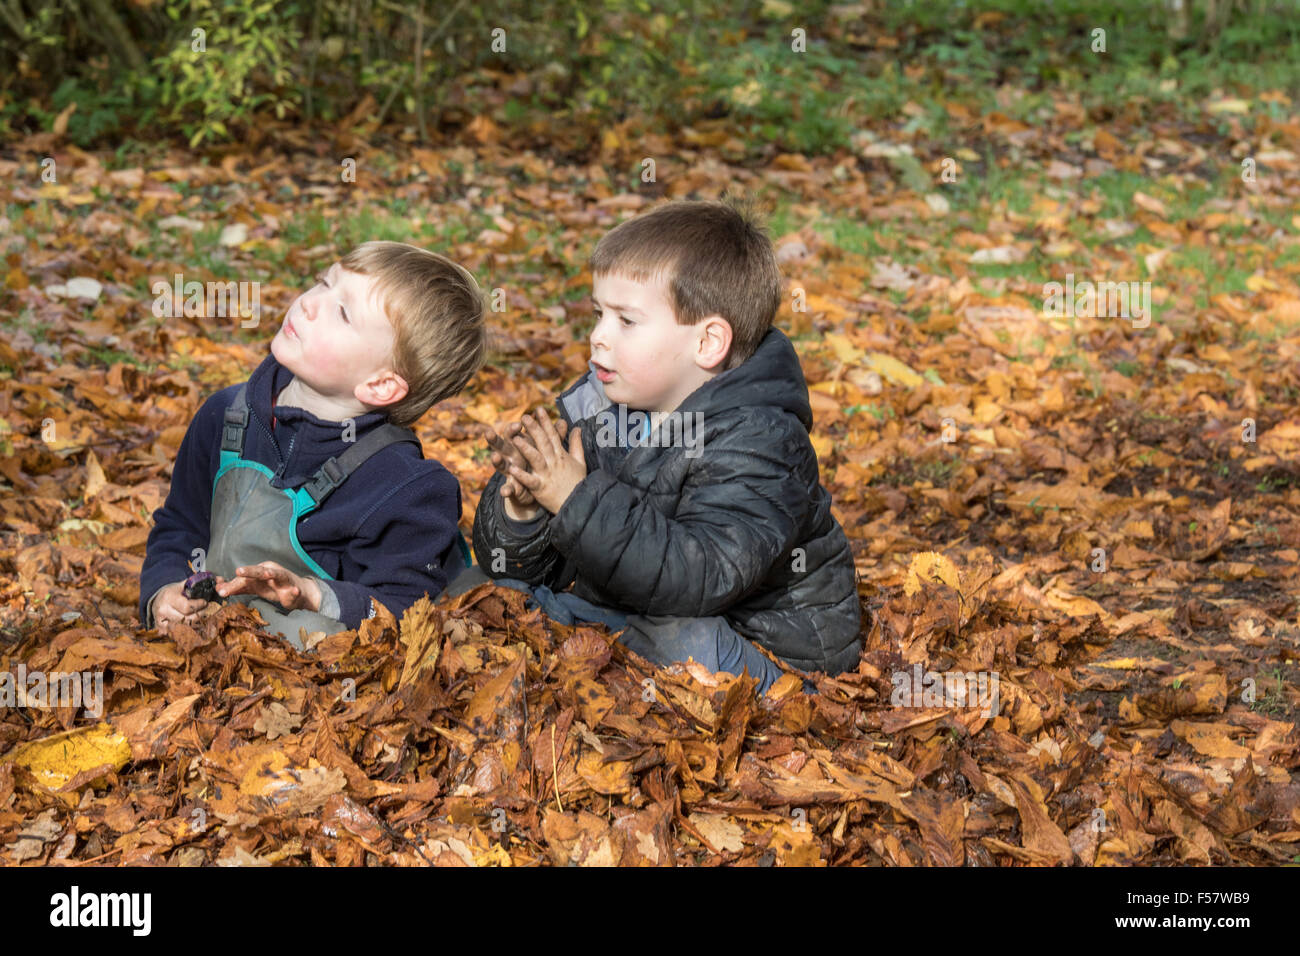 Playing in autumn leaves, England, UK Stock Photo